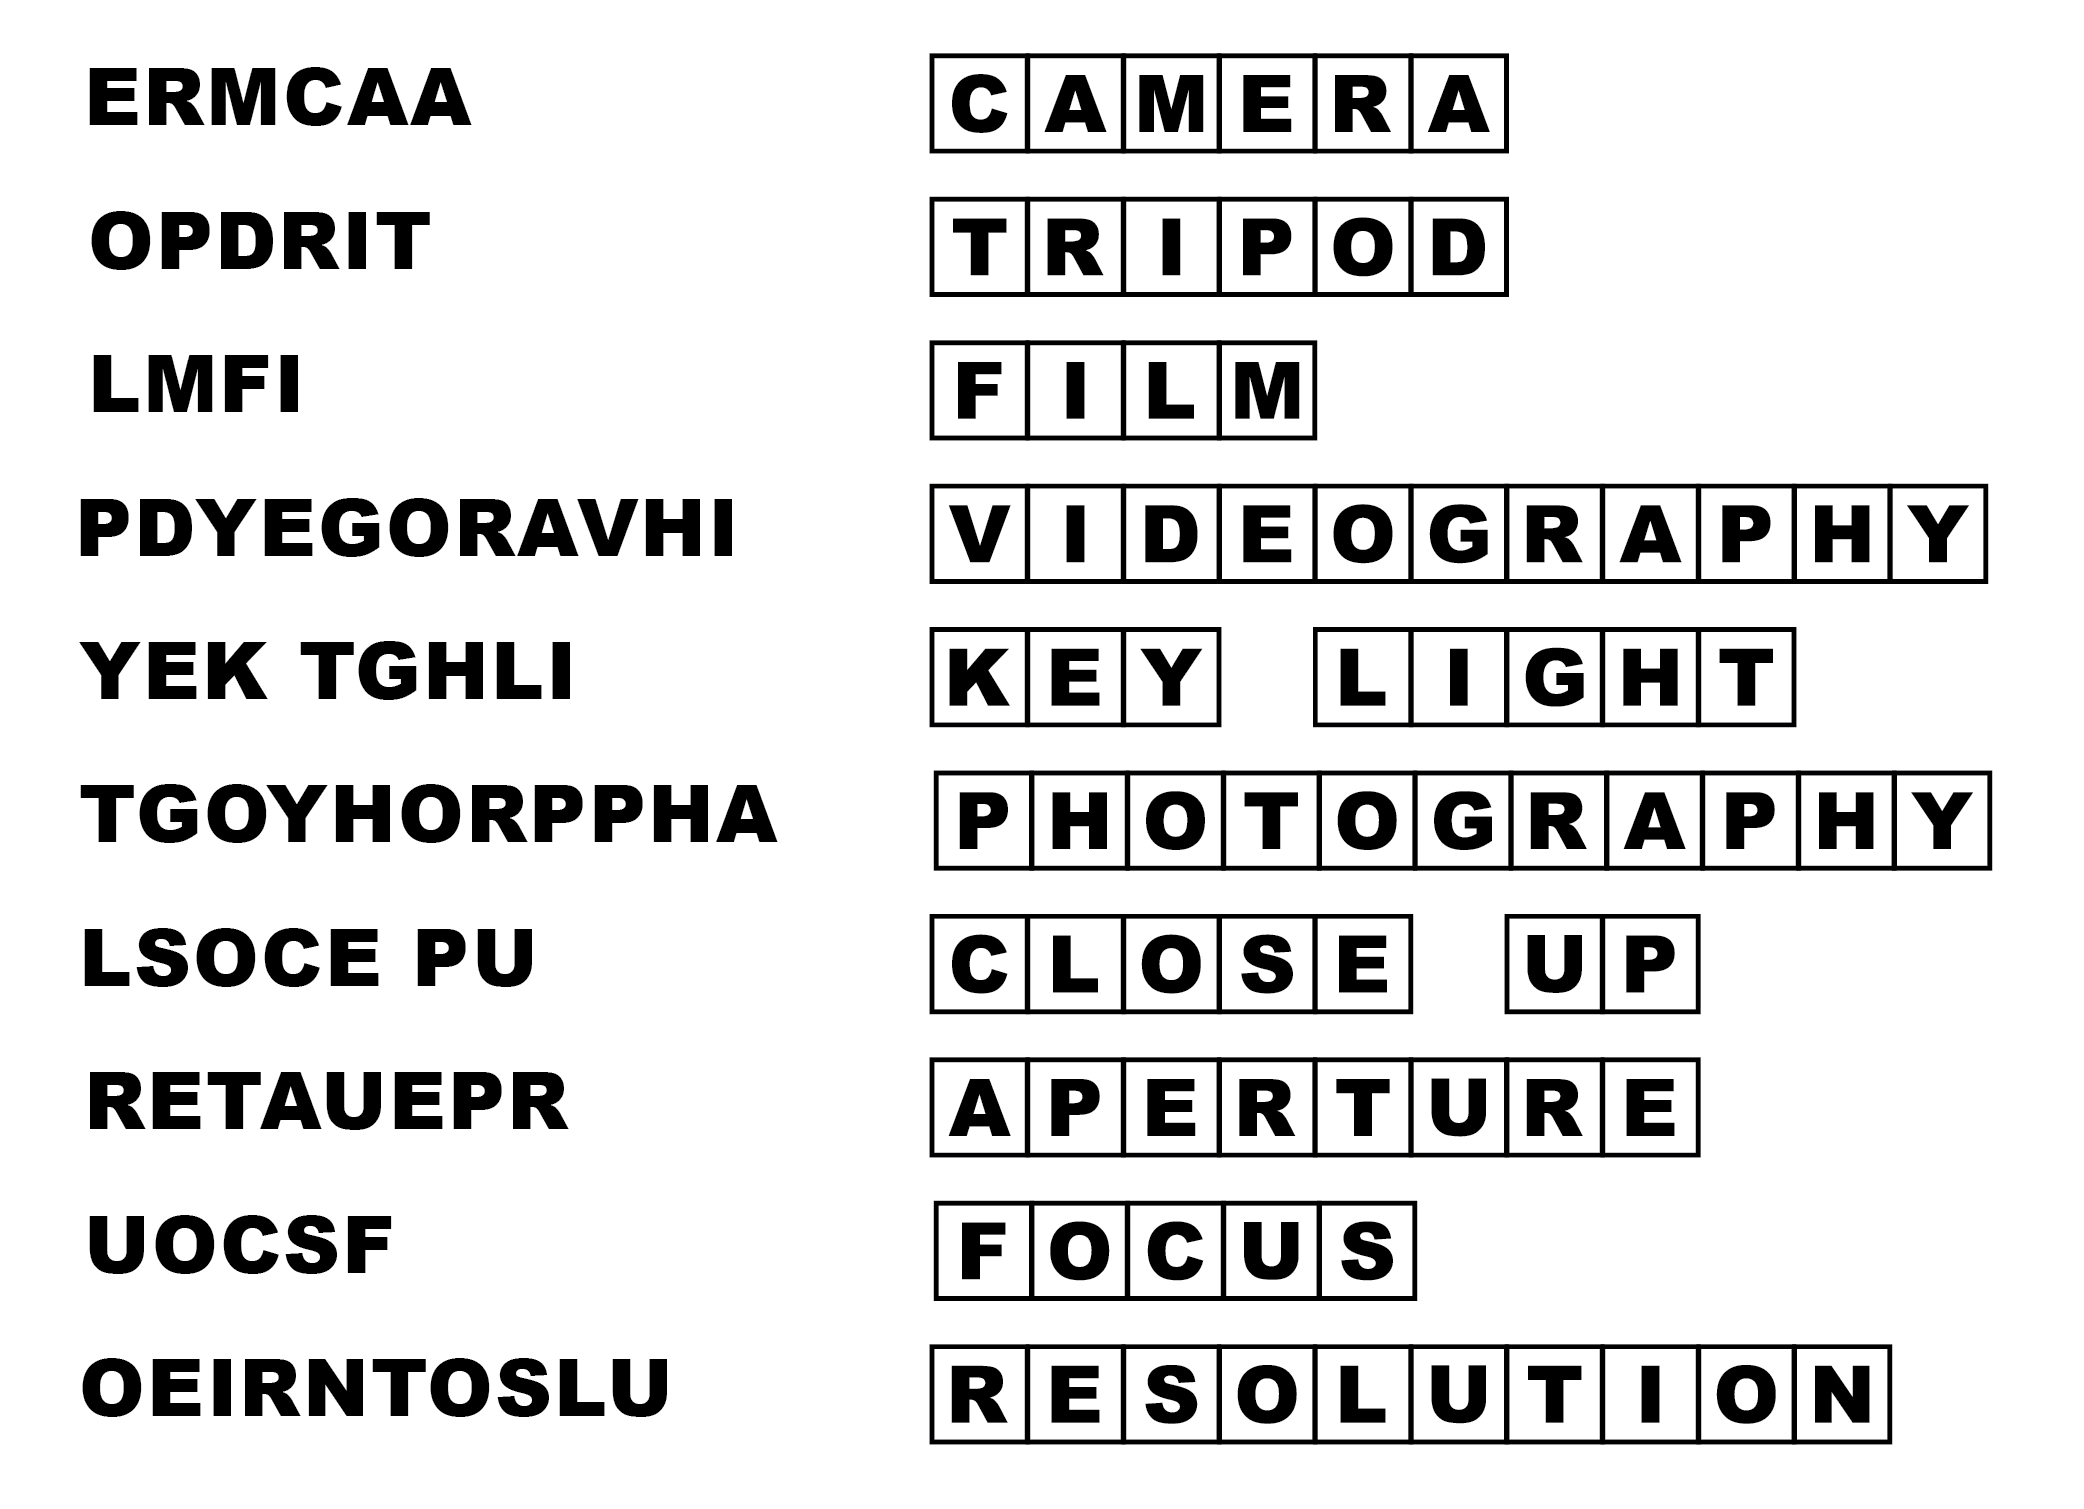 Solution for Issue #2 Word Scramble Puzzle